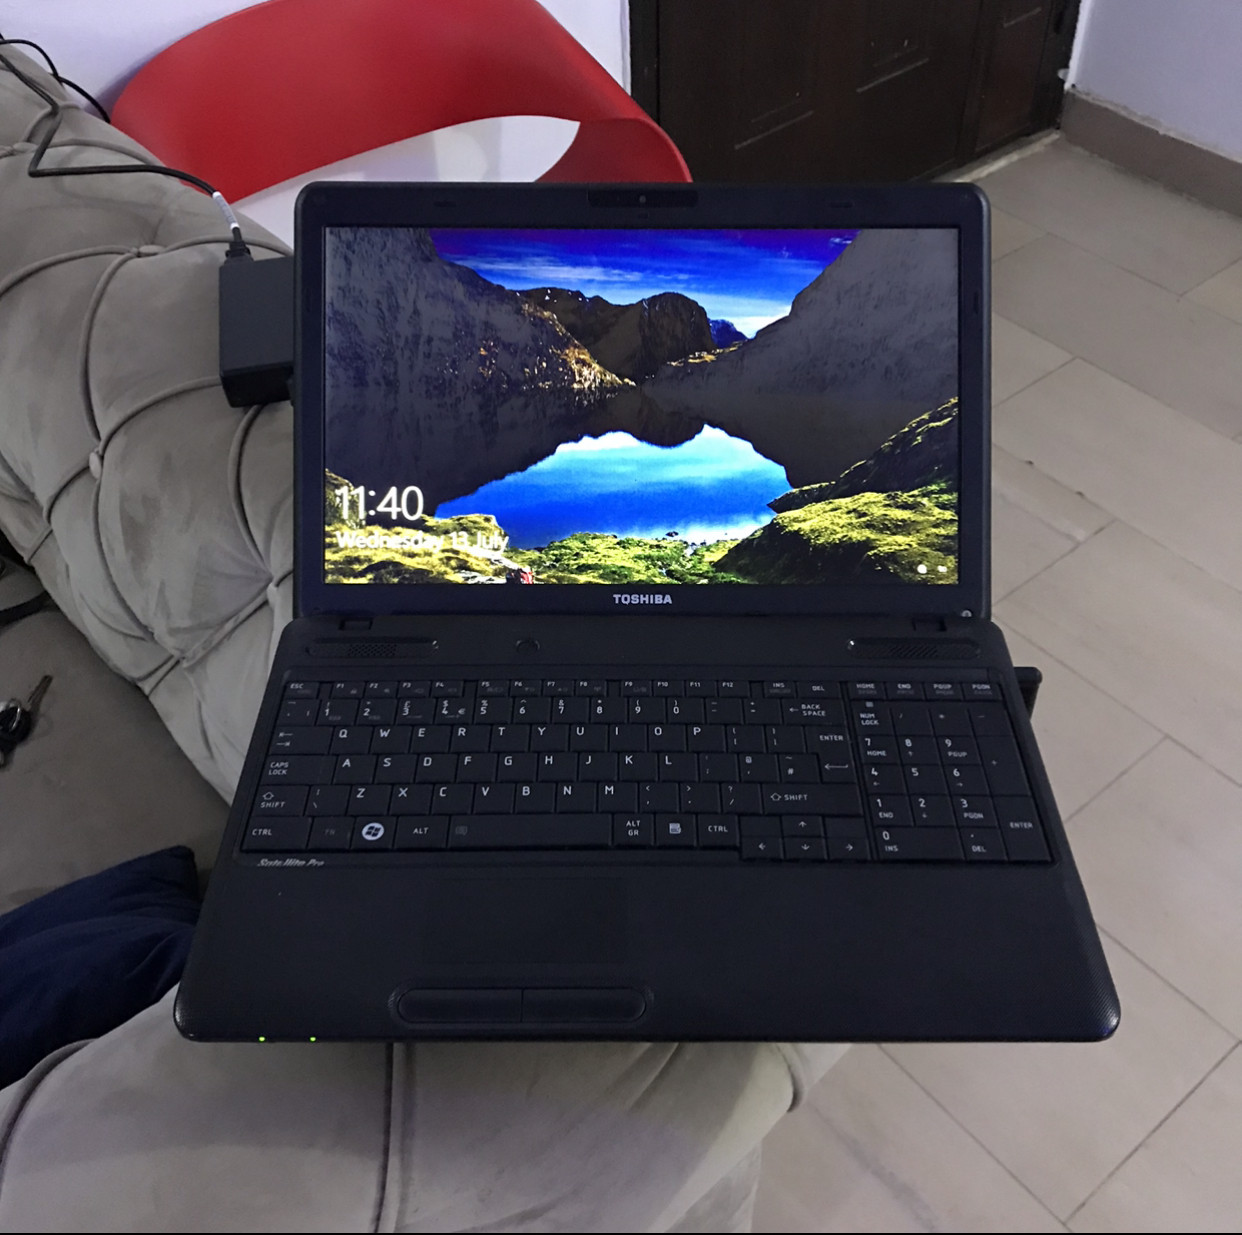 [K4]- 4Gb Ram, 320Gb Hdd, 2-3Hours Ba3 Life, Toshiba Satellite Laptop #For_Sale